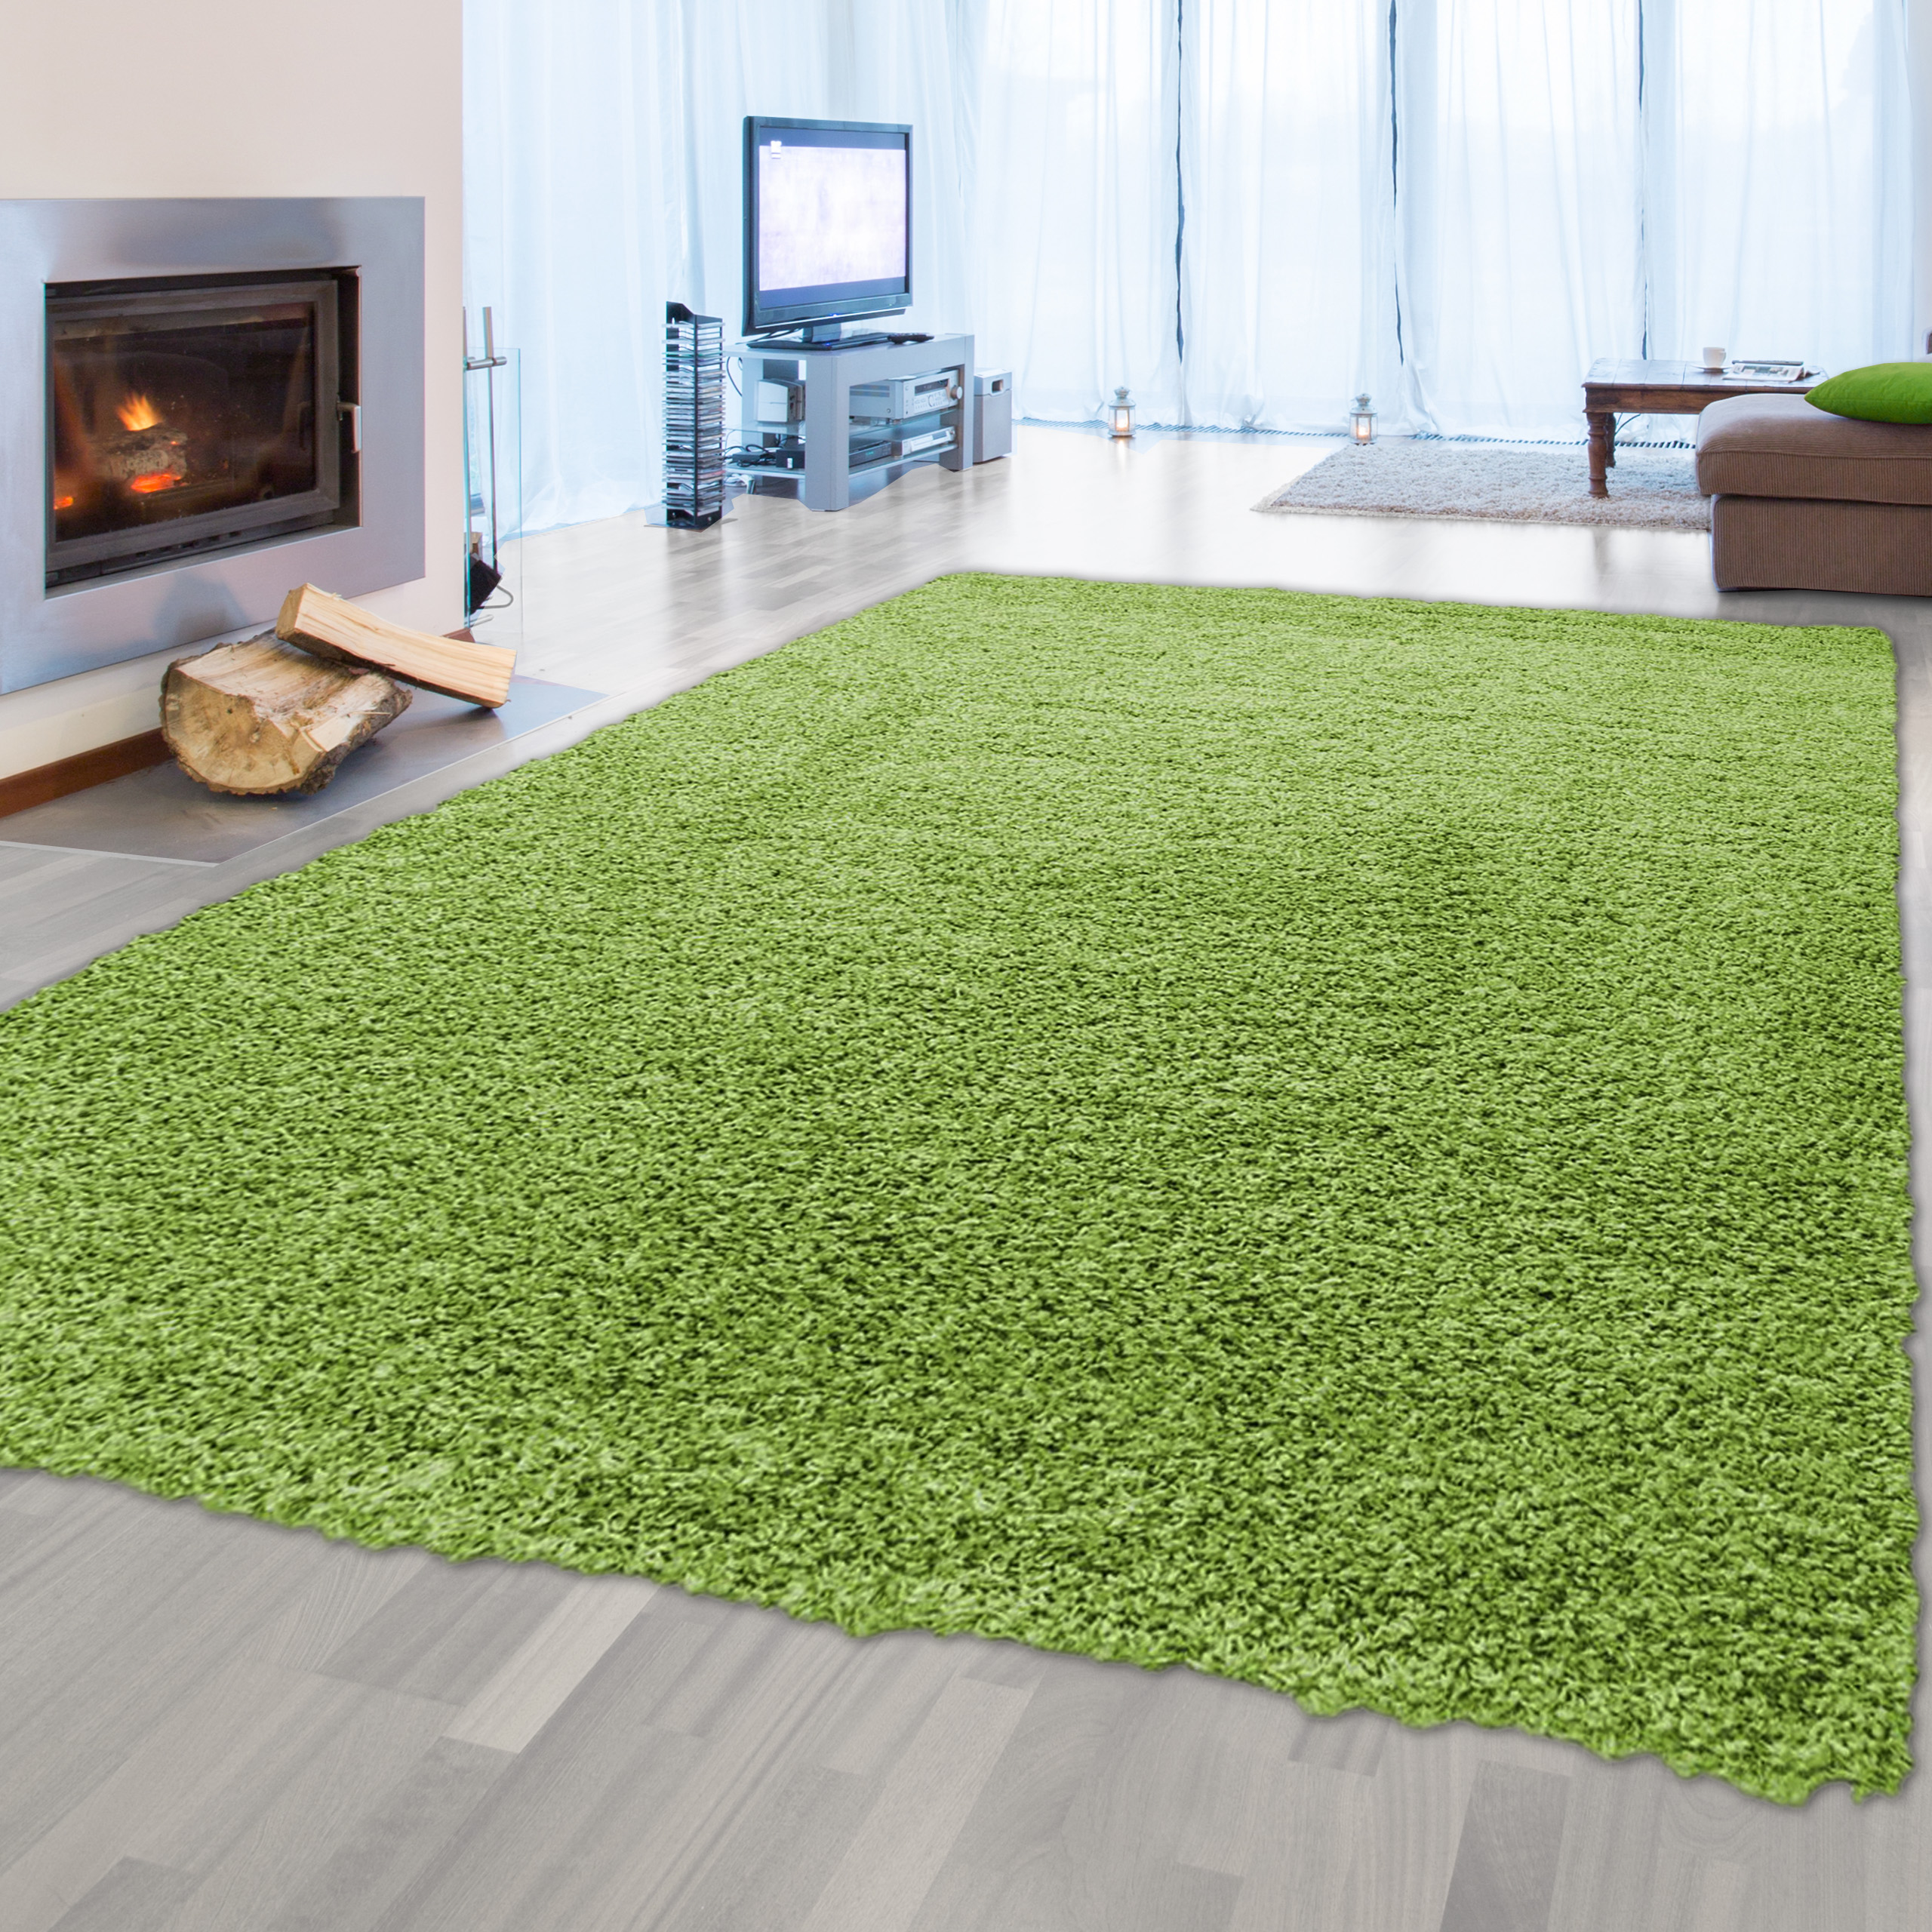 Shag carpet emission free 2.2 gr / m² Total weight (approx) 30mm overall  height (approx) 100% Merilon frisee, polypropylenes - Teppich-Traum